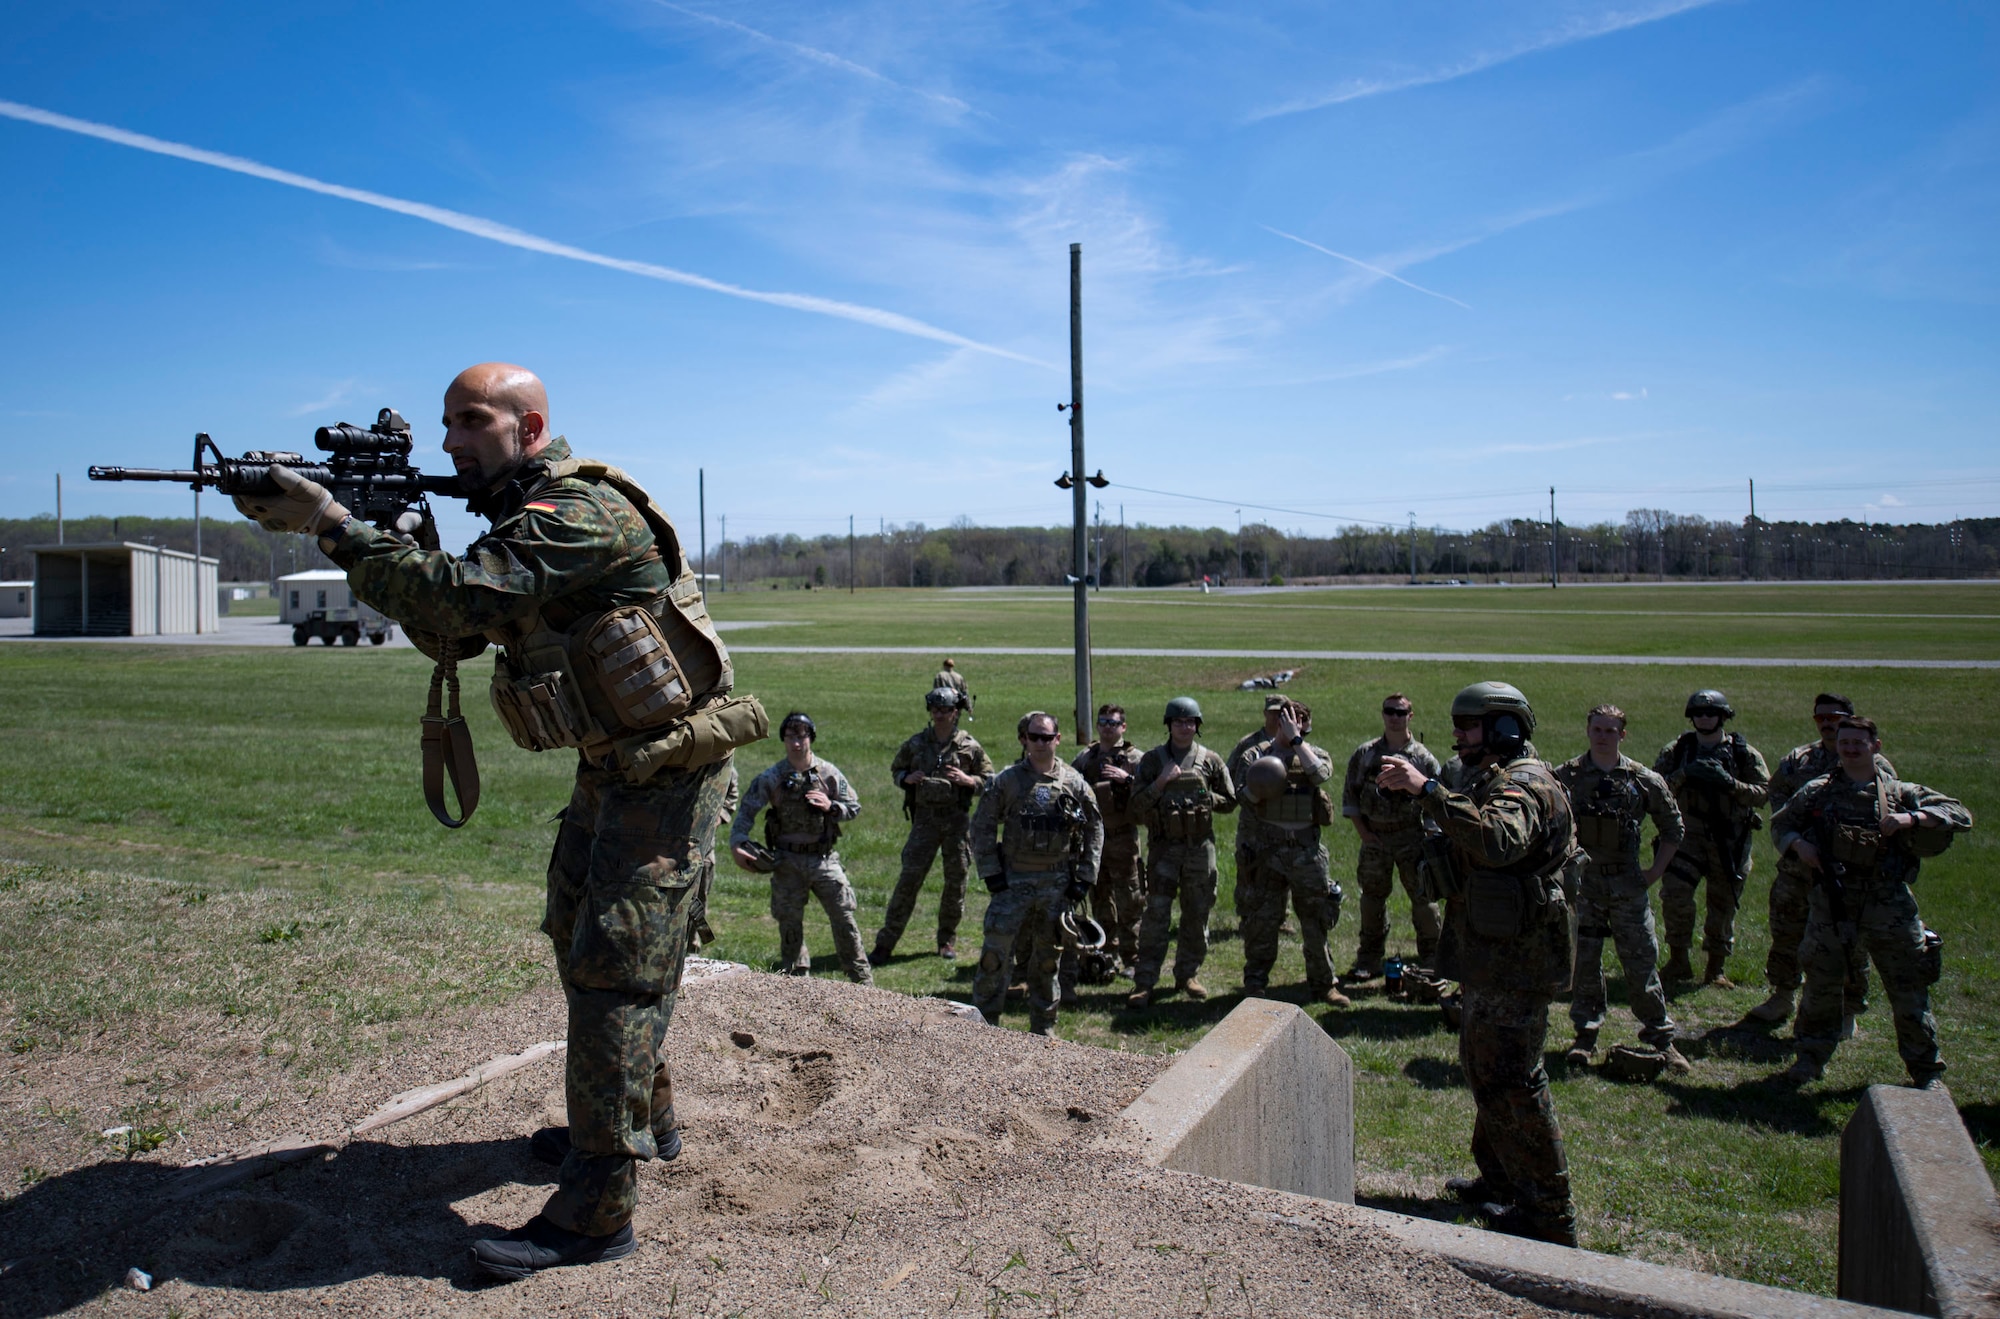 German Air Force Maj. Nader Samadi, German Air Ground Operations Squadron commander demonstrates the different stances Airmen must shoot from to successfully complete the shooting portion of a German armed forces proficiency assessment, April 4, 2017, at Fort Campbell, Ky. To enhance their ability to work together in deployed locations, members of the German Air Force travelled to Fort Campbell to train and exercise with the 19th ASOS. While at Fort Campbell, The German Air Force members hosted a German armed forces proficiency assessment for Airmen consisting of shooting firearms, swimming, agility exercises and a rucksack march.